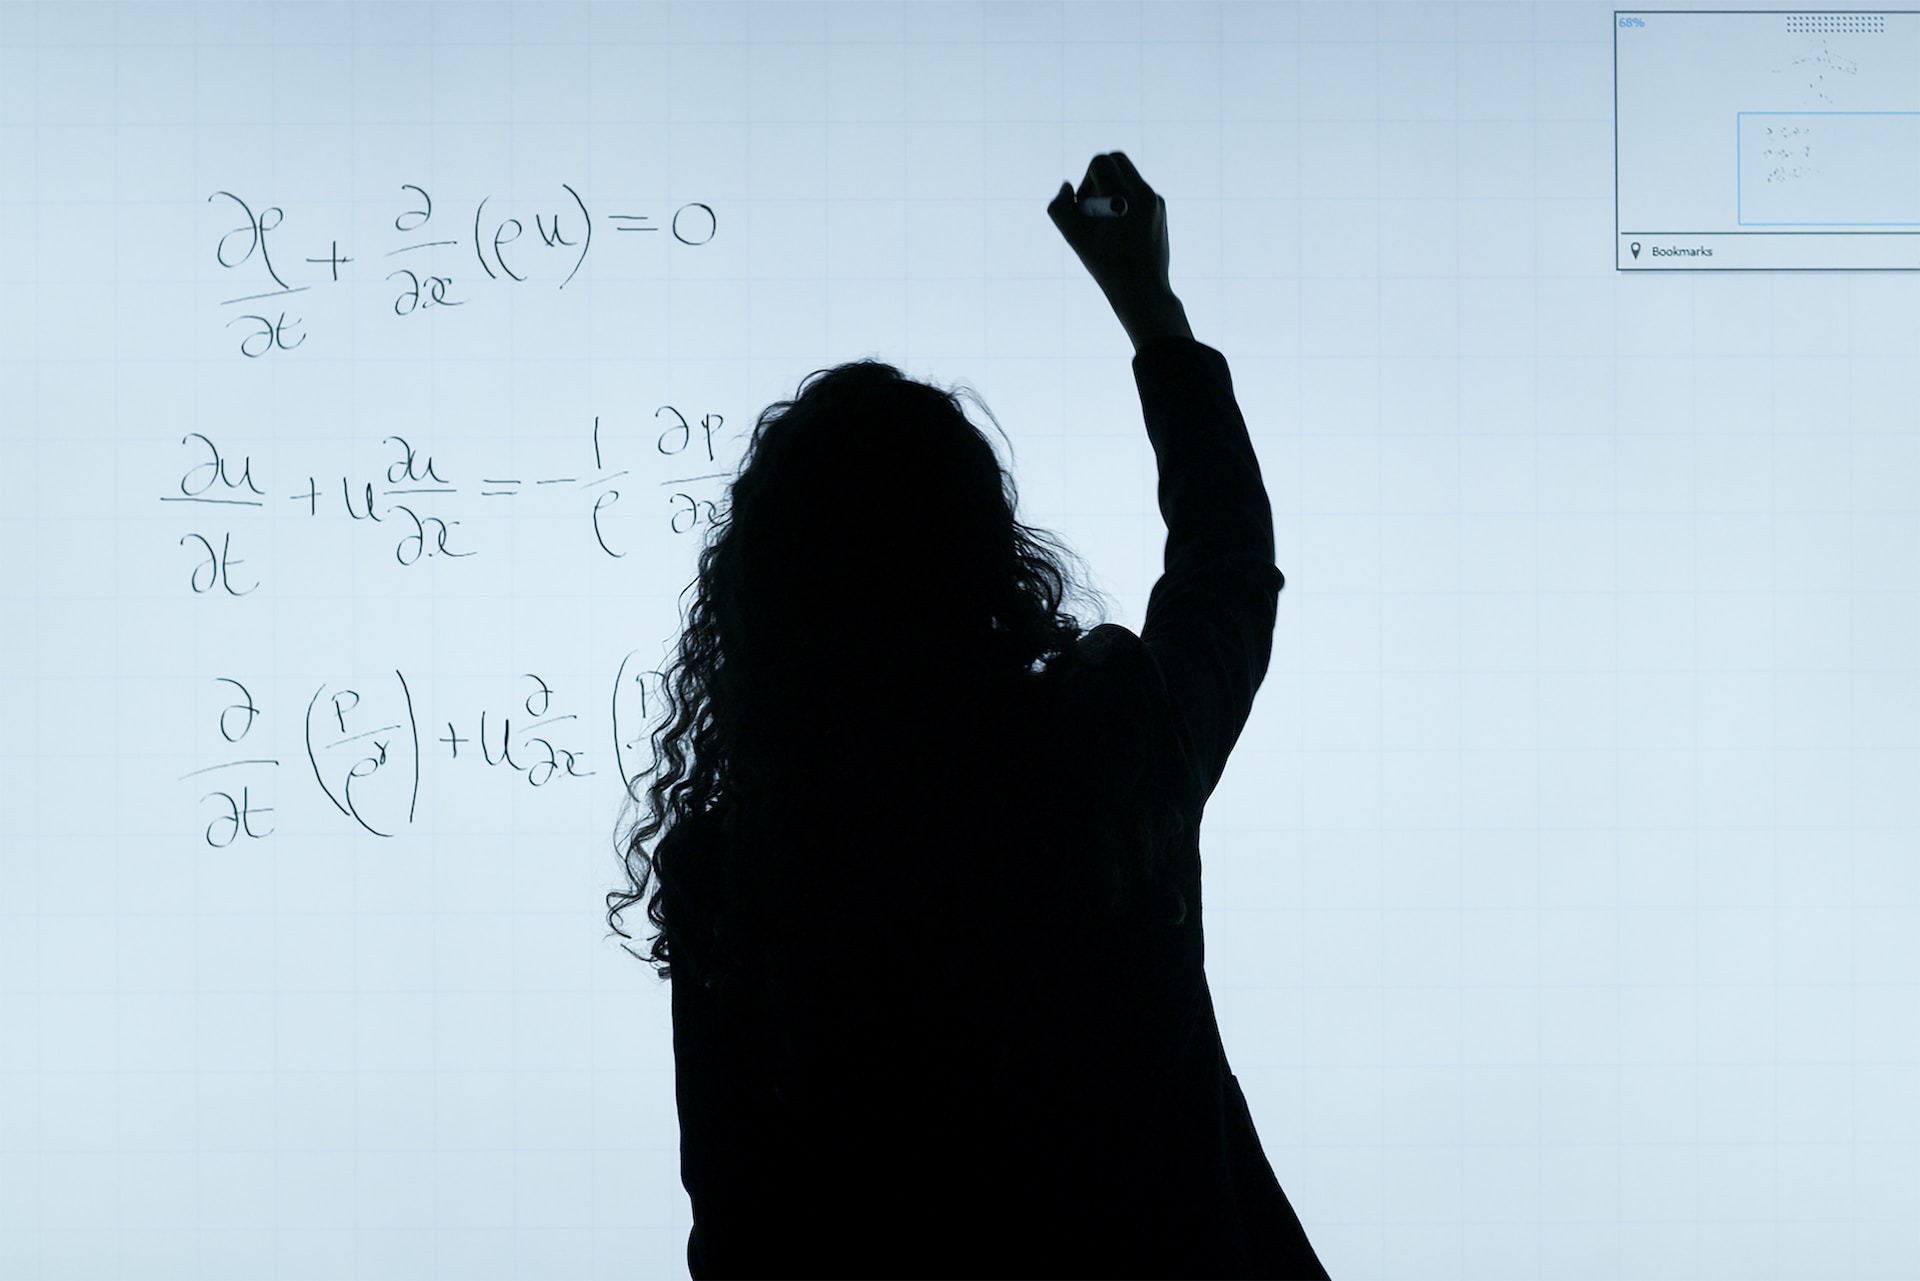 Silhouette of a person writing out a calculation on a white board